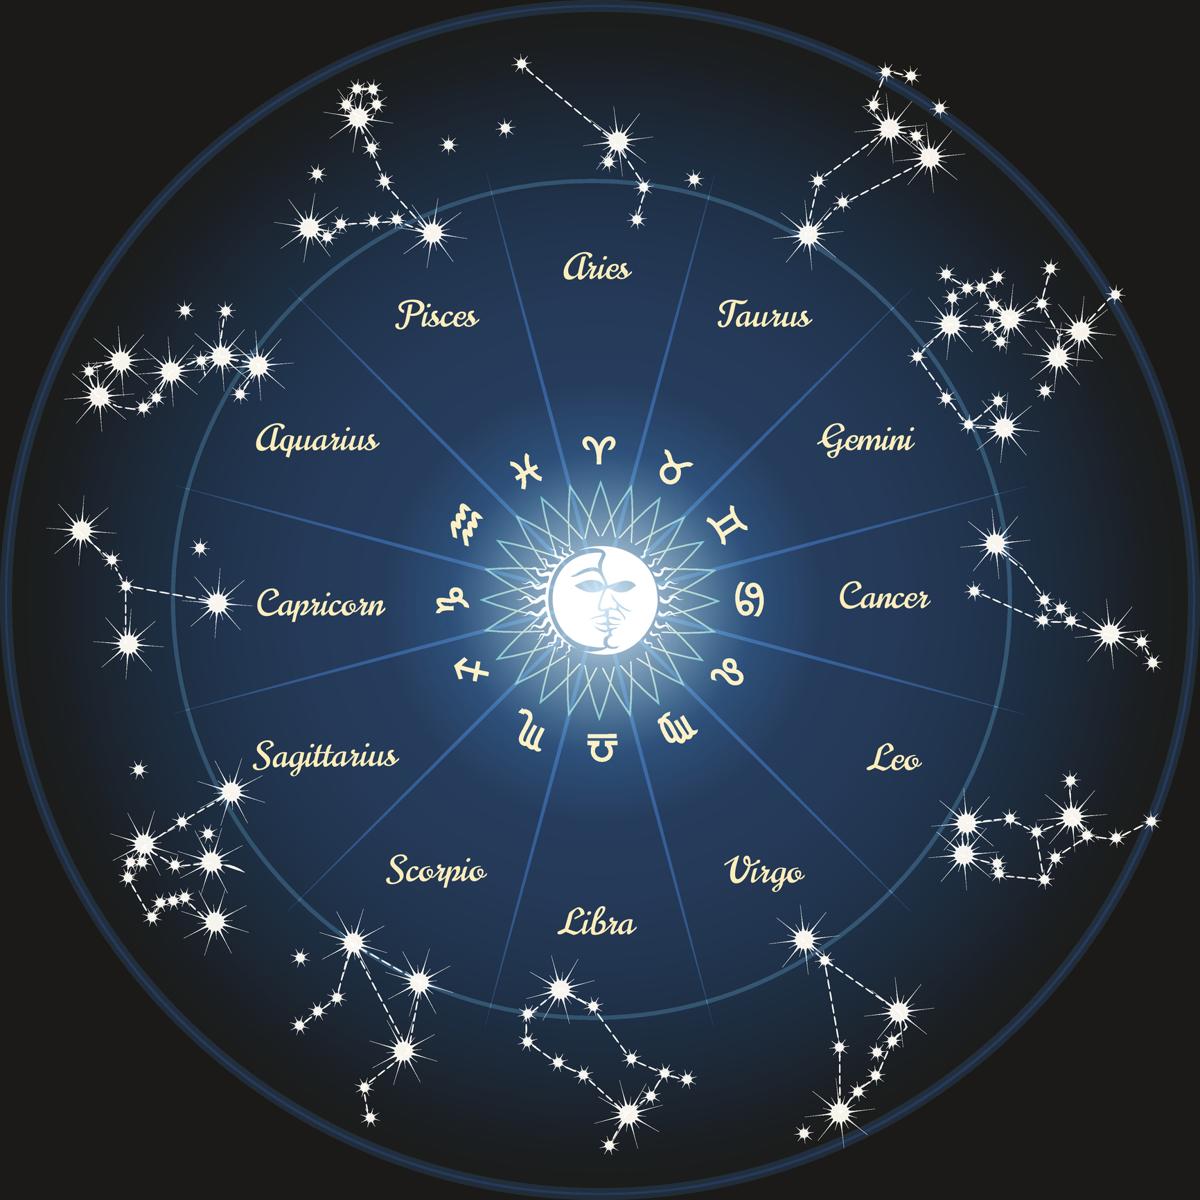 personality based on astrology chart